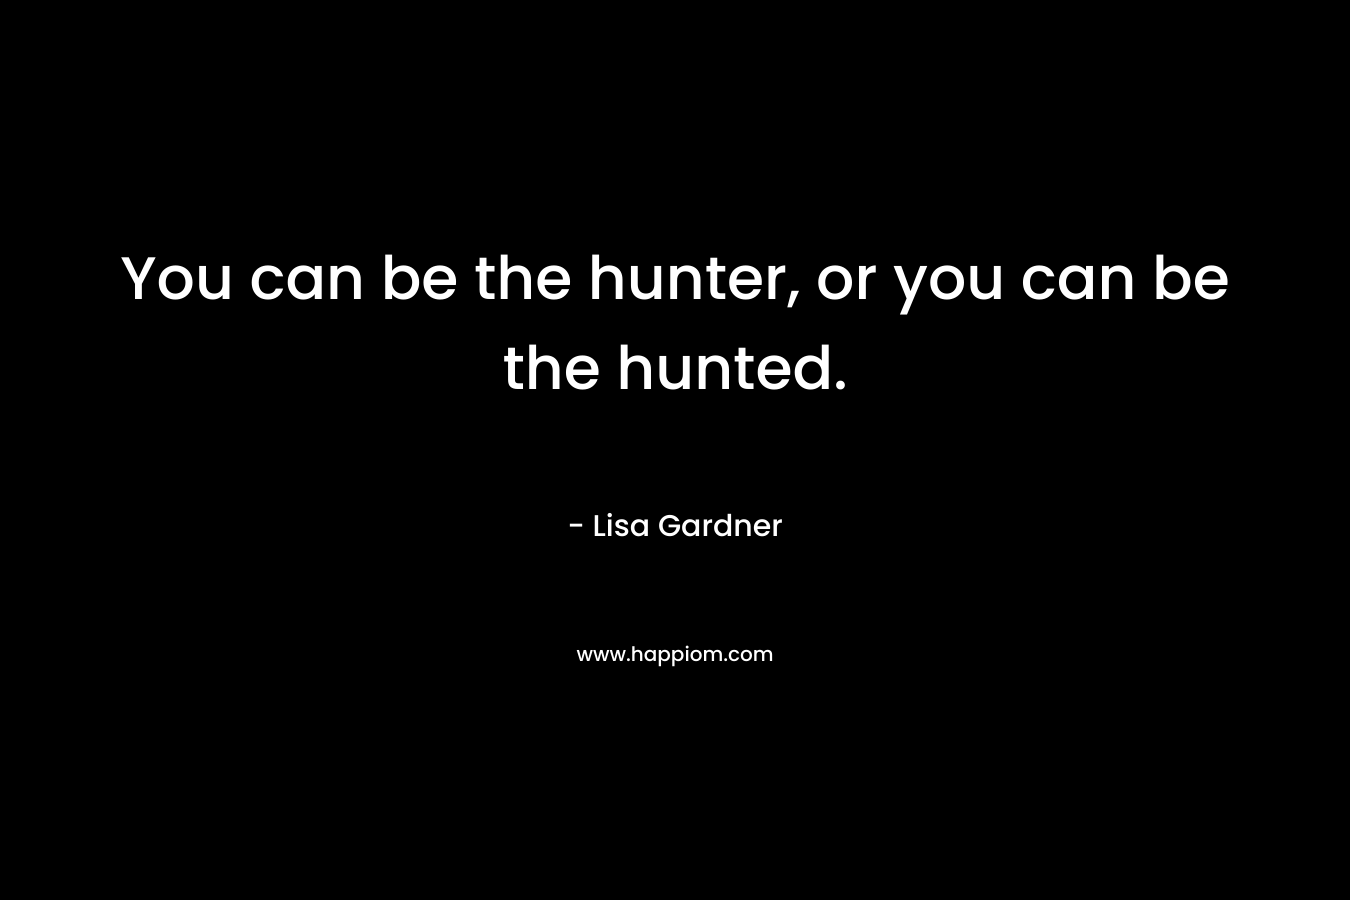 You can be the hunter, or you can be the hunted. – Lisa Gardner